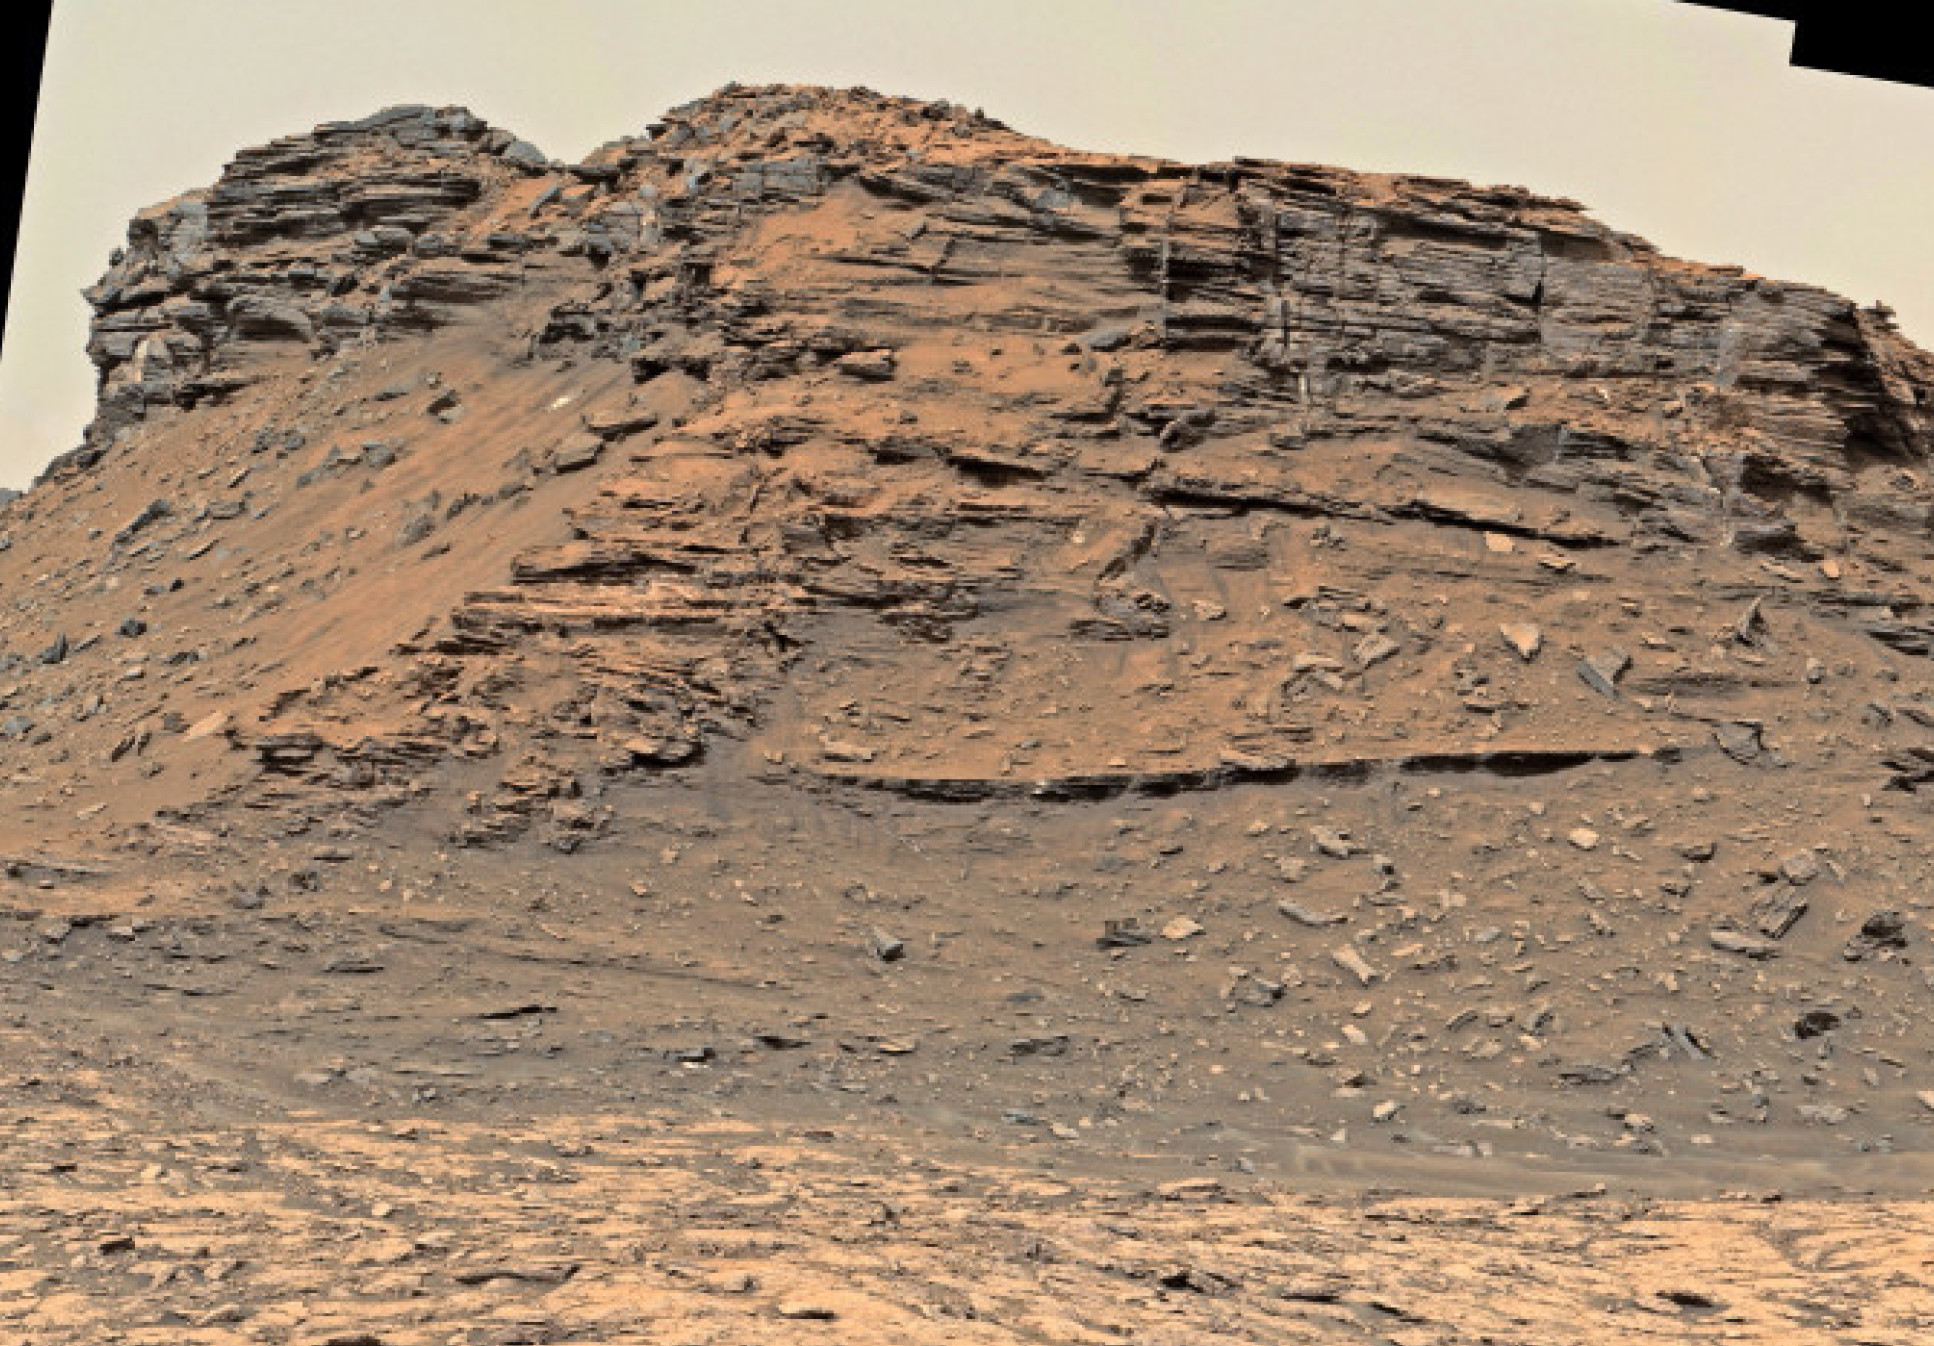 Photo of rock tower on Mars